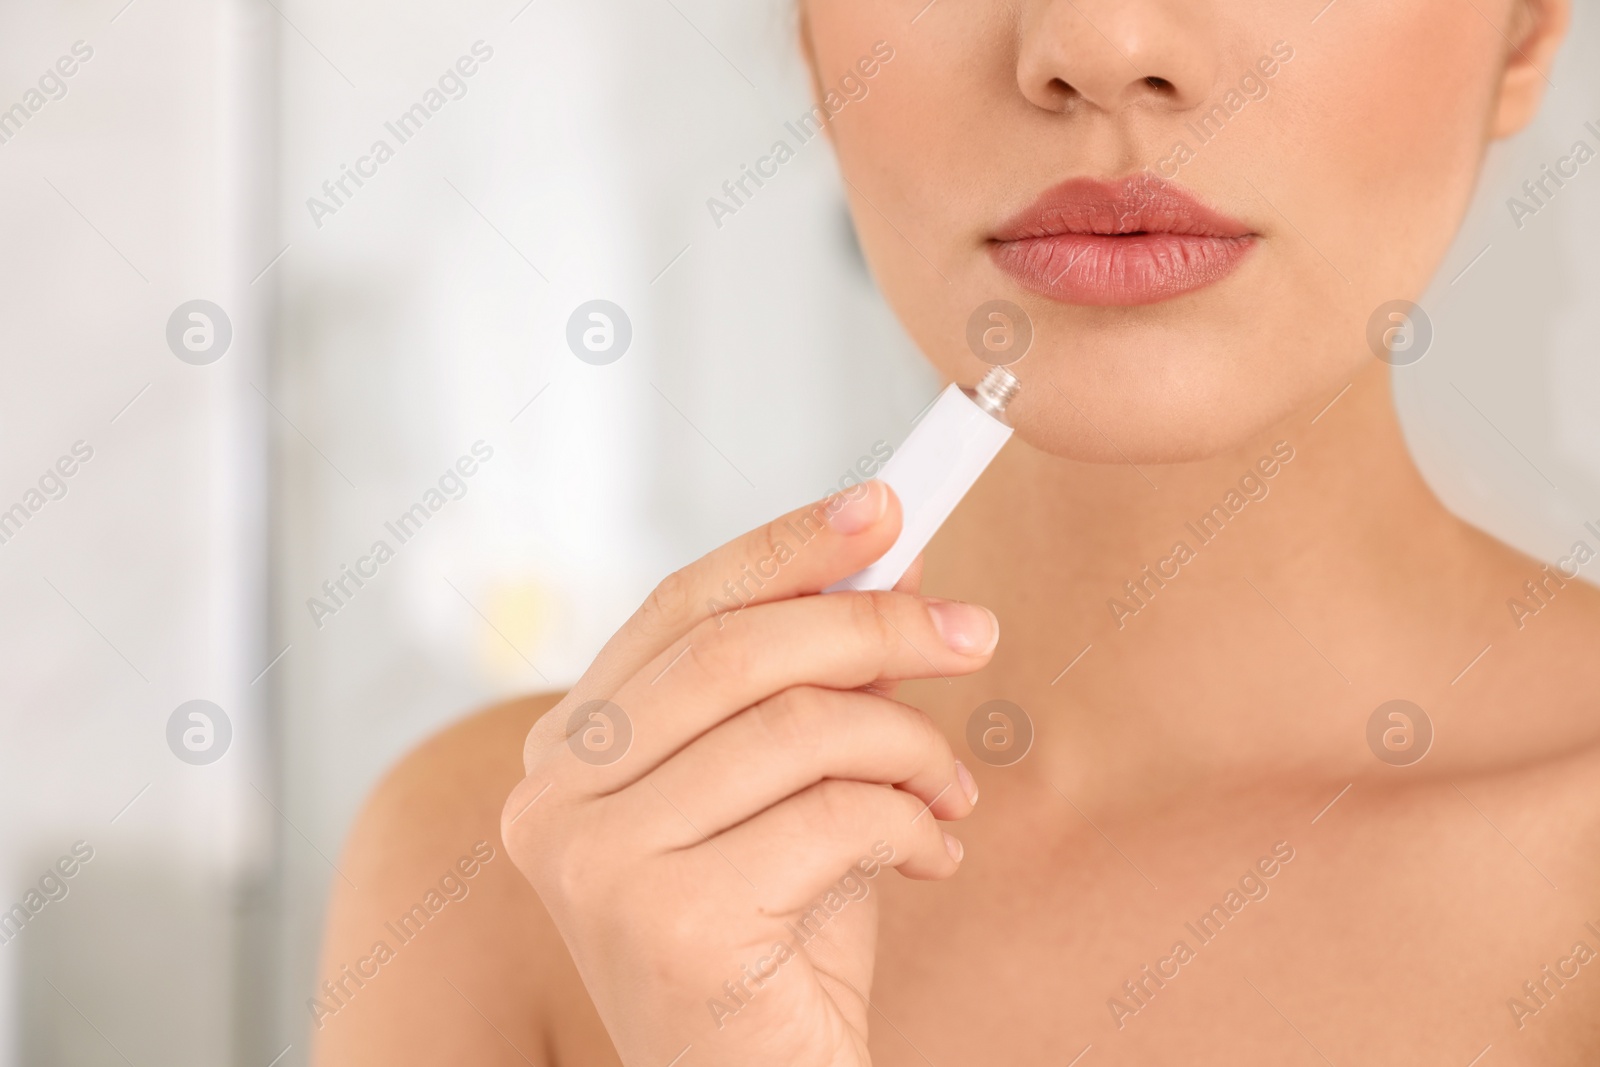 Photo of Woman with herpes applying cream on lips against blurred background, closeup